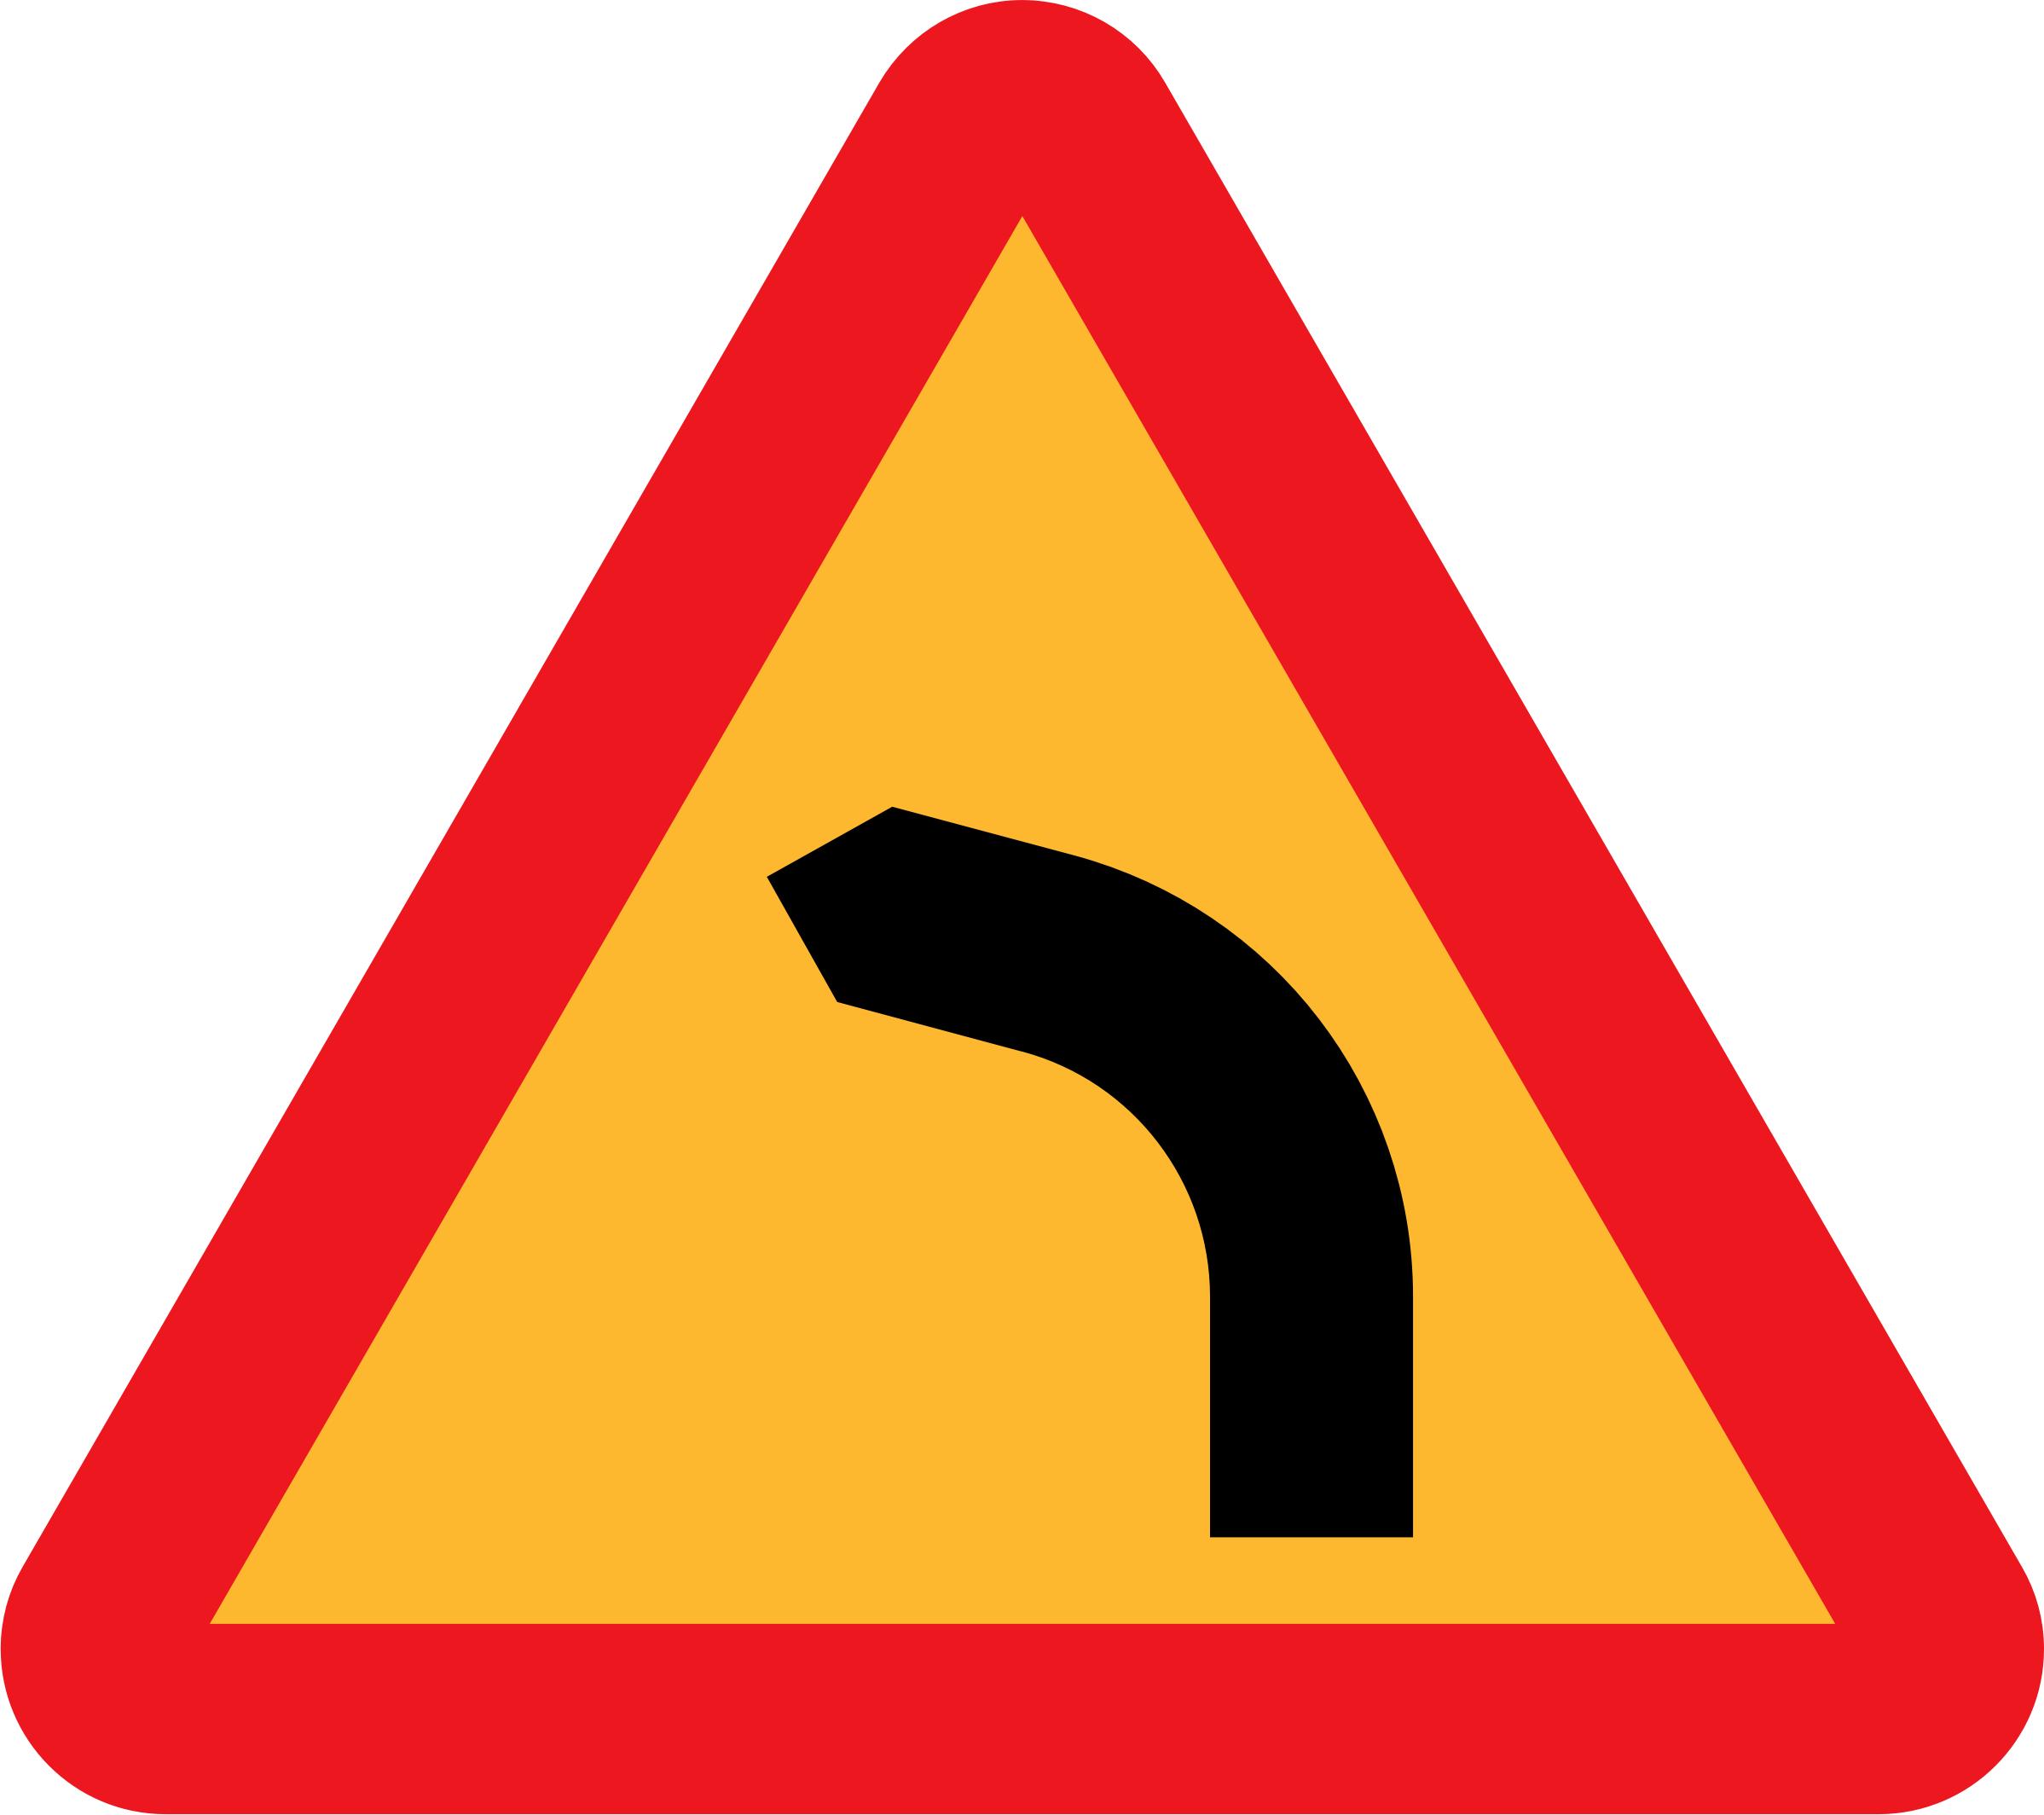 Dangerous bend, bend to left icons